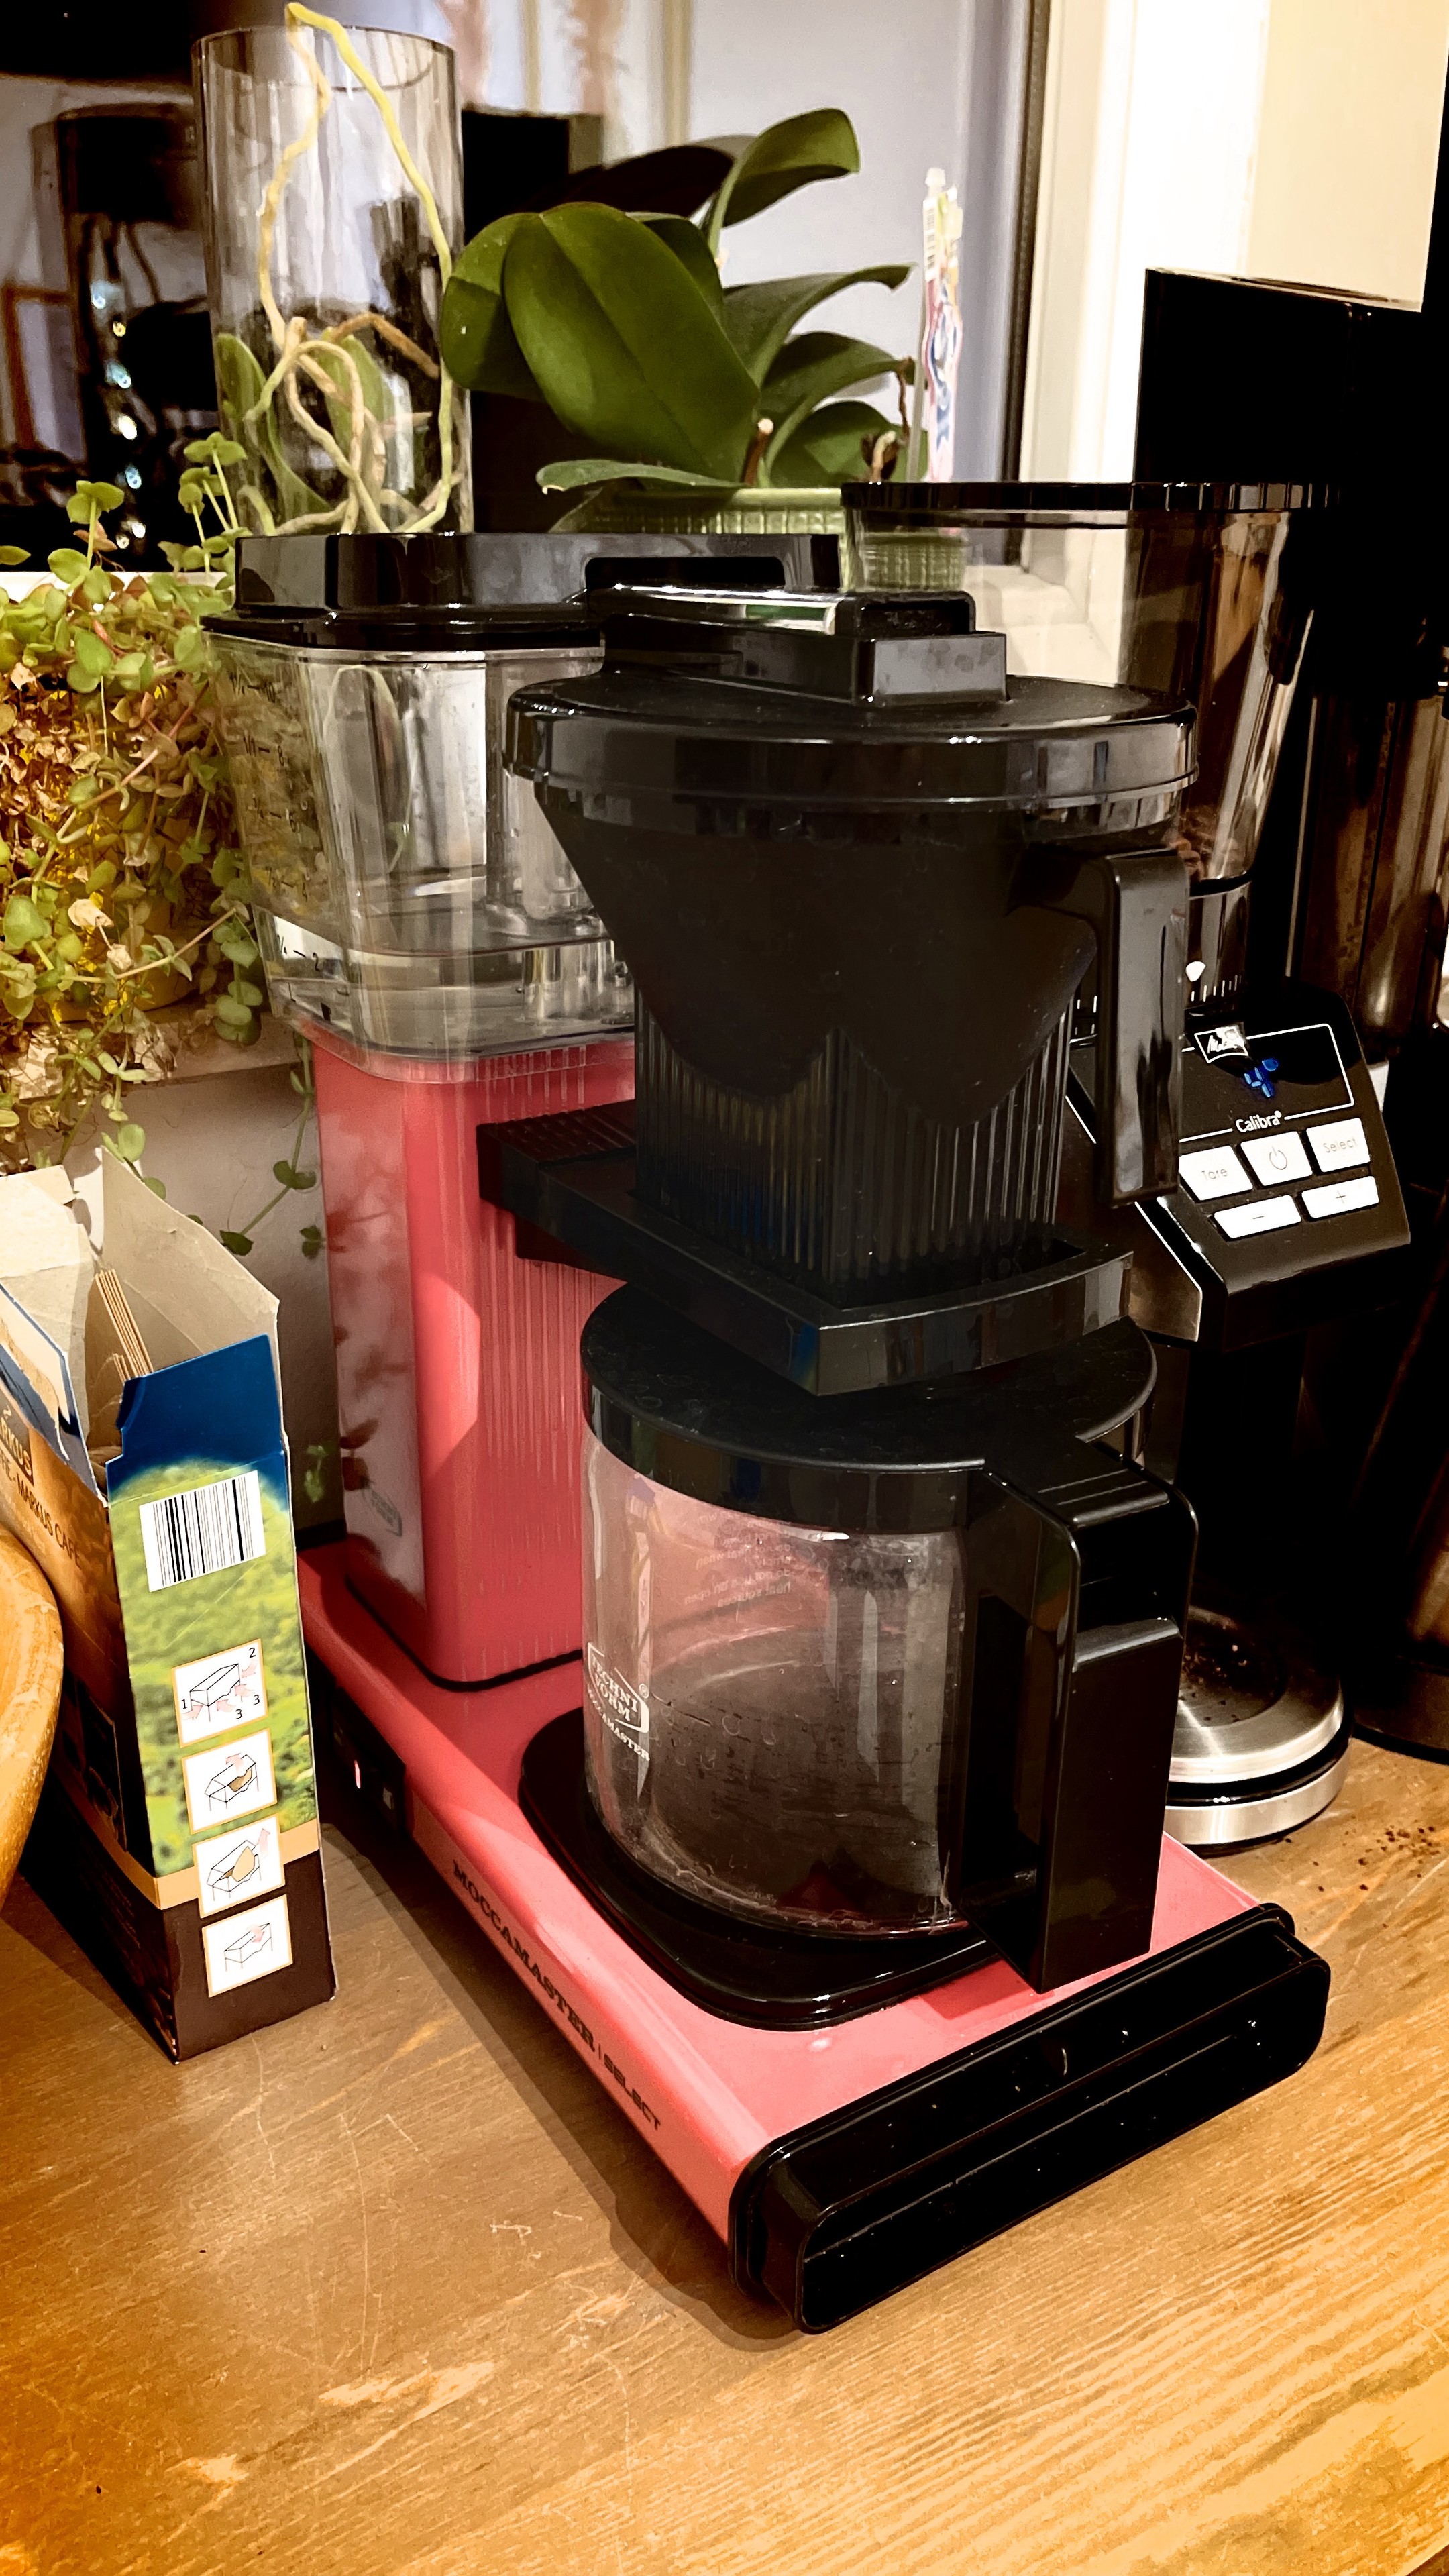 A coffee maker placed on a kitchen countertop, with a glass vase containing a plant next to it and other kitchen items in the background.